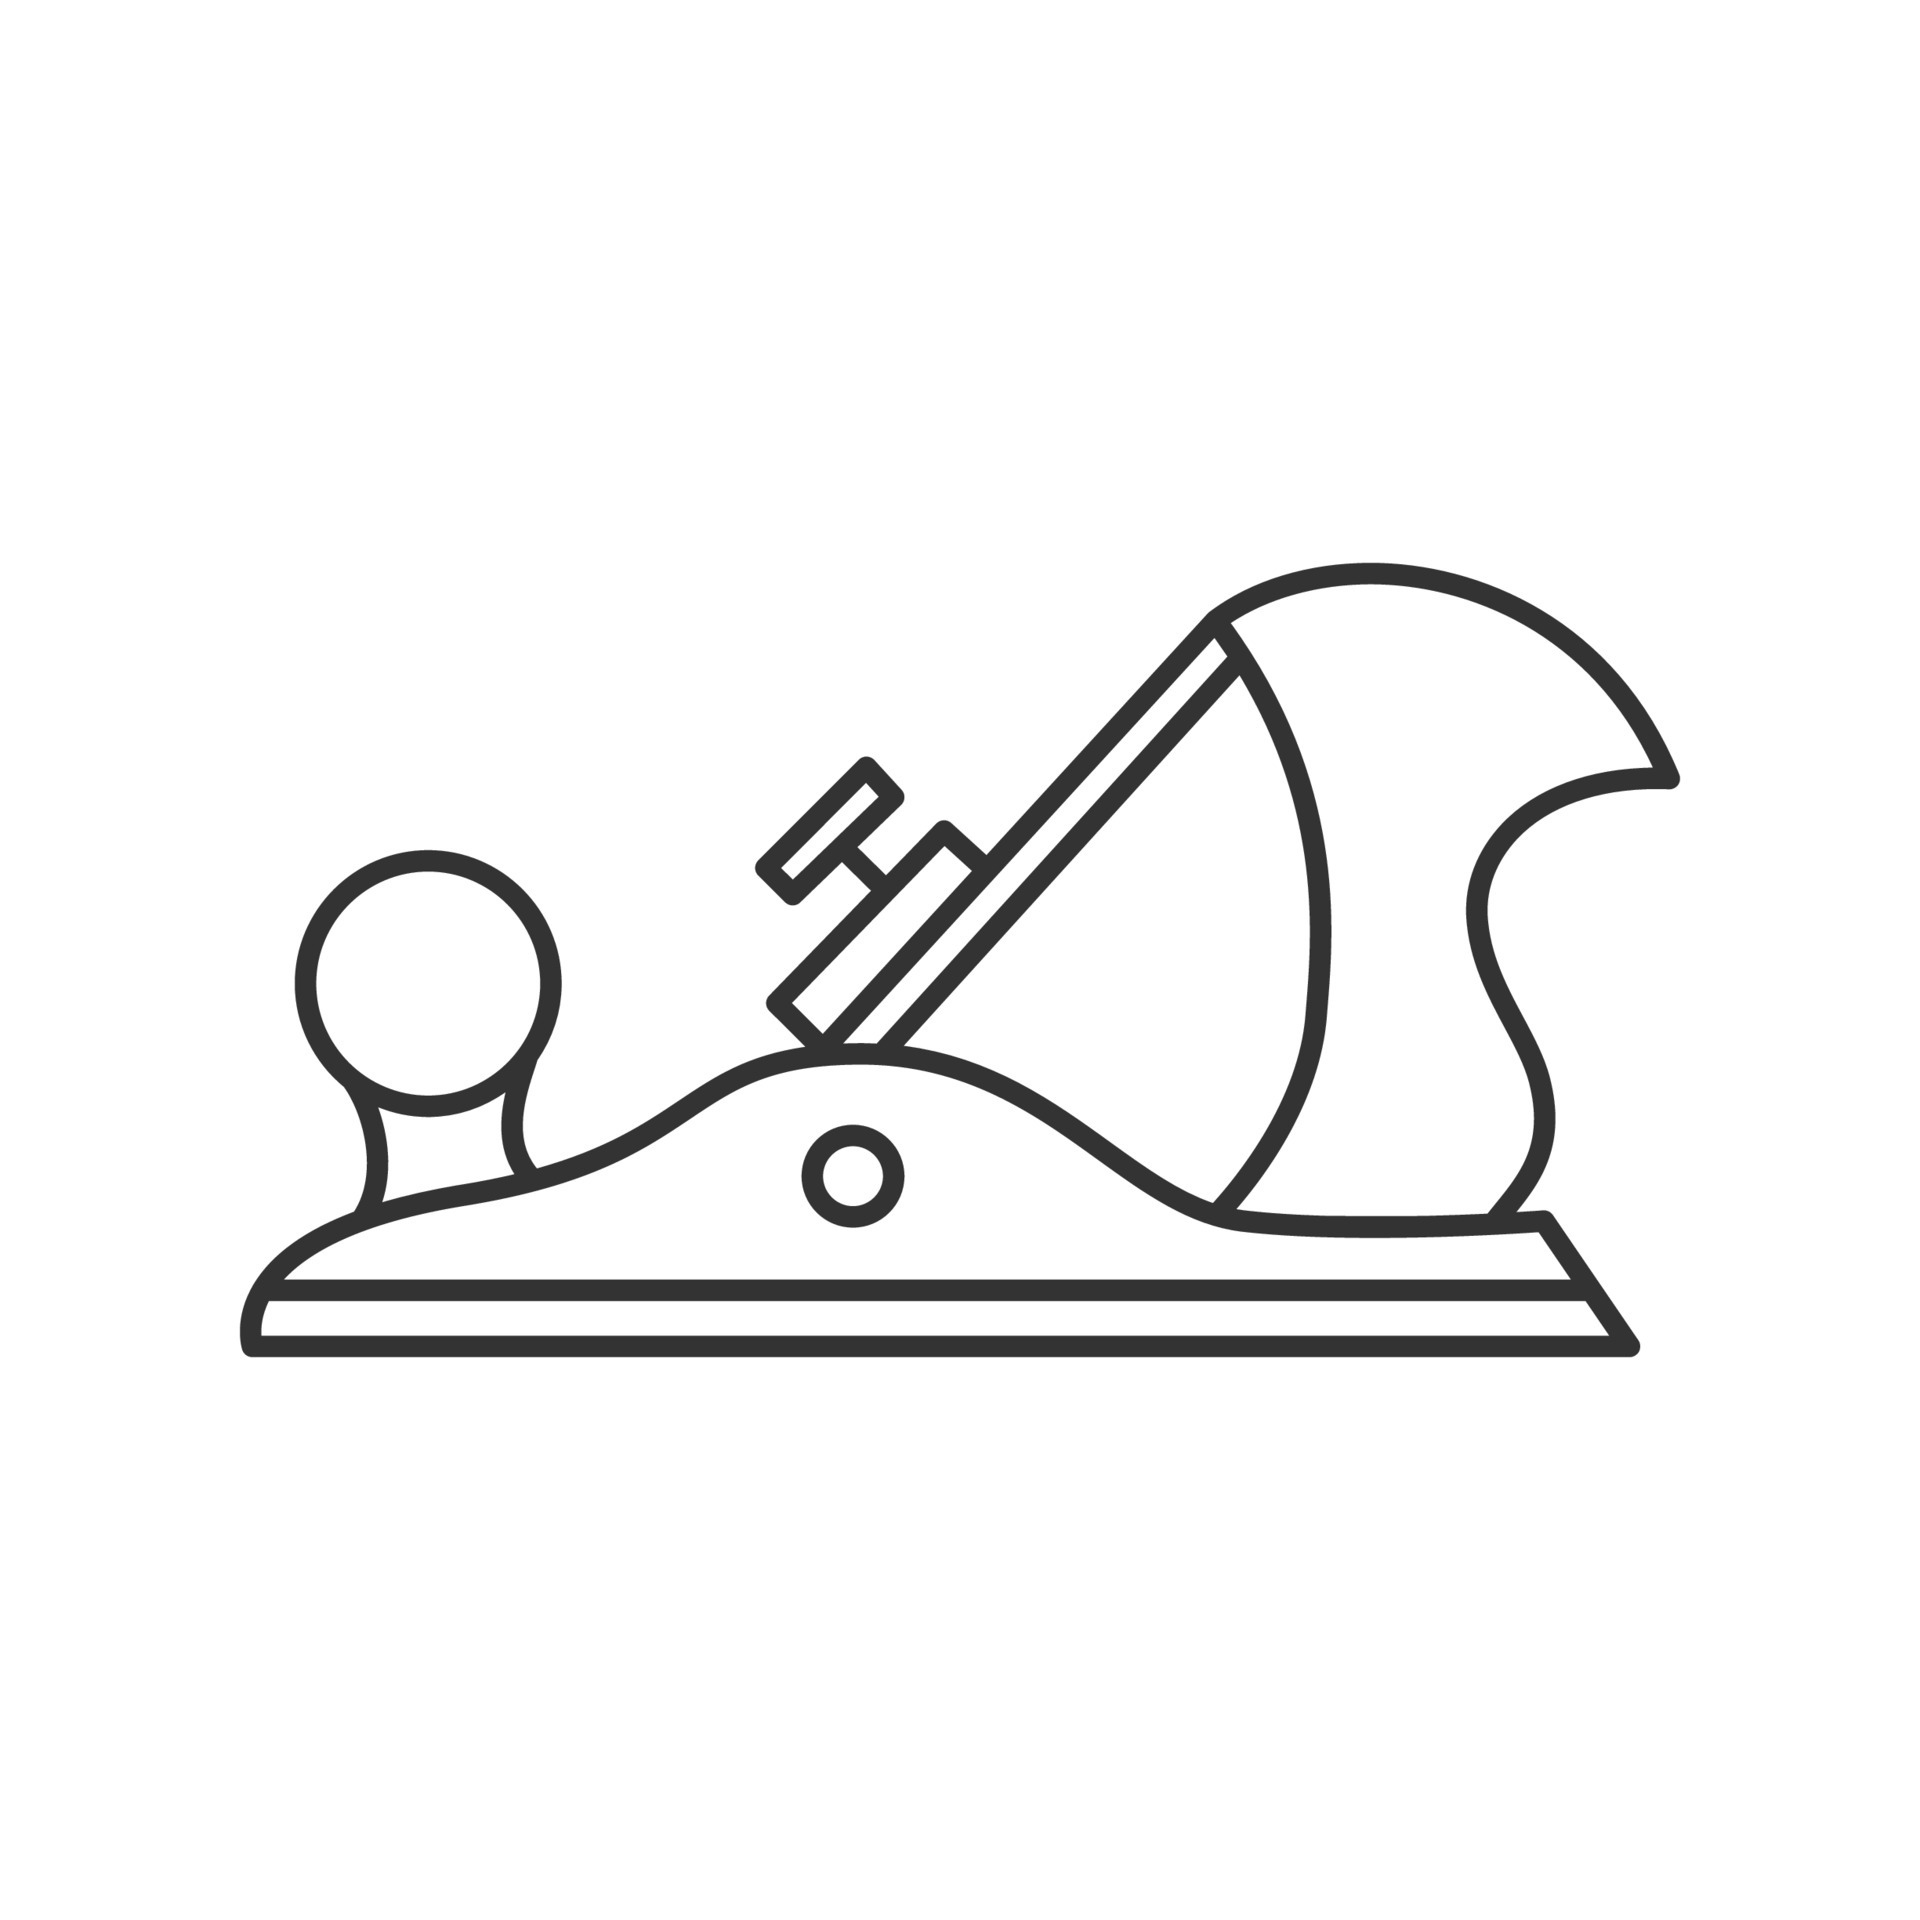 Hand Plane Icon Sketch Style Woodworking Stock Vector Royalty Free  1694302174  Shutterstock